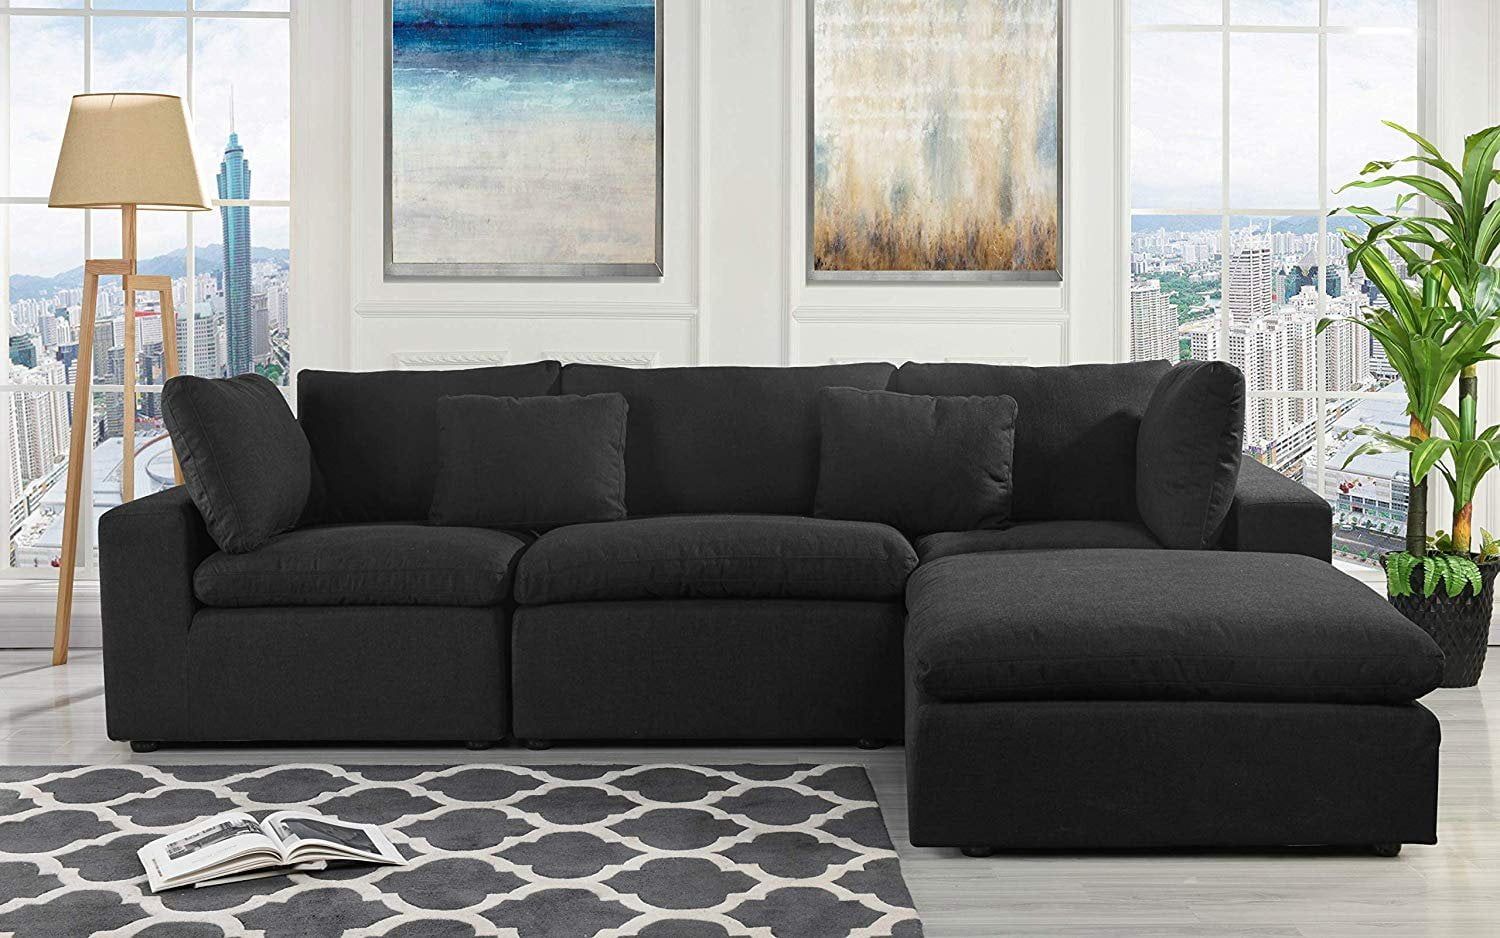 Classic Large Linen Fabric Sectional Sofa, L Shape Couch With Wide With 3 Seat L Shaped Sofas In Black (Gallery 4 of 20)